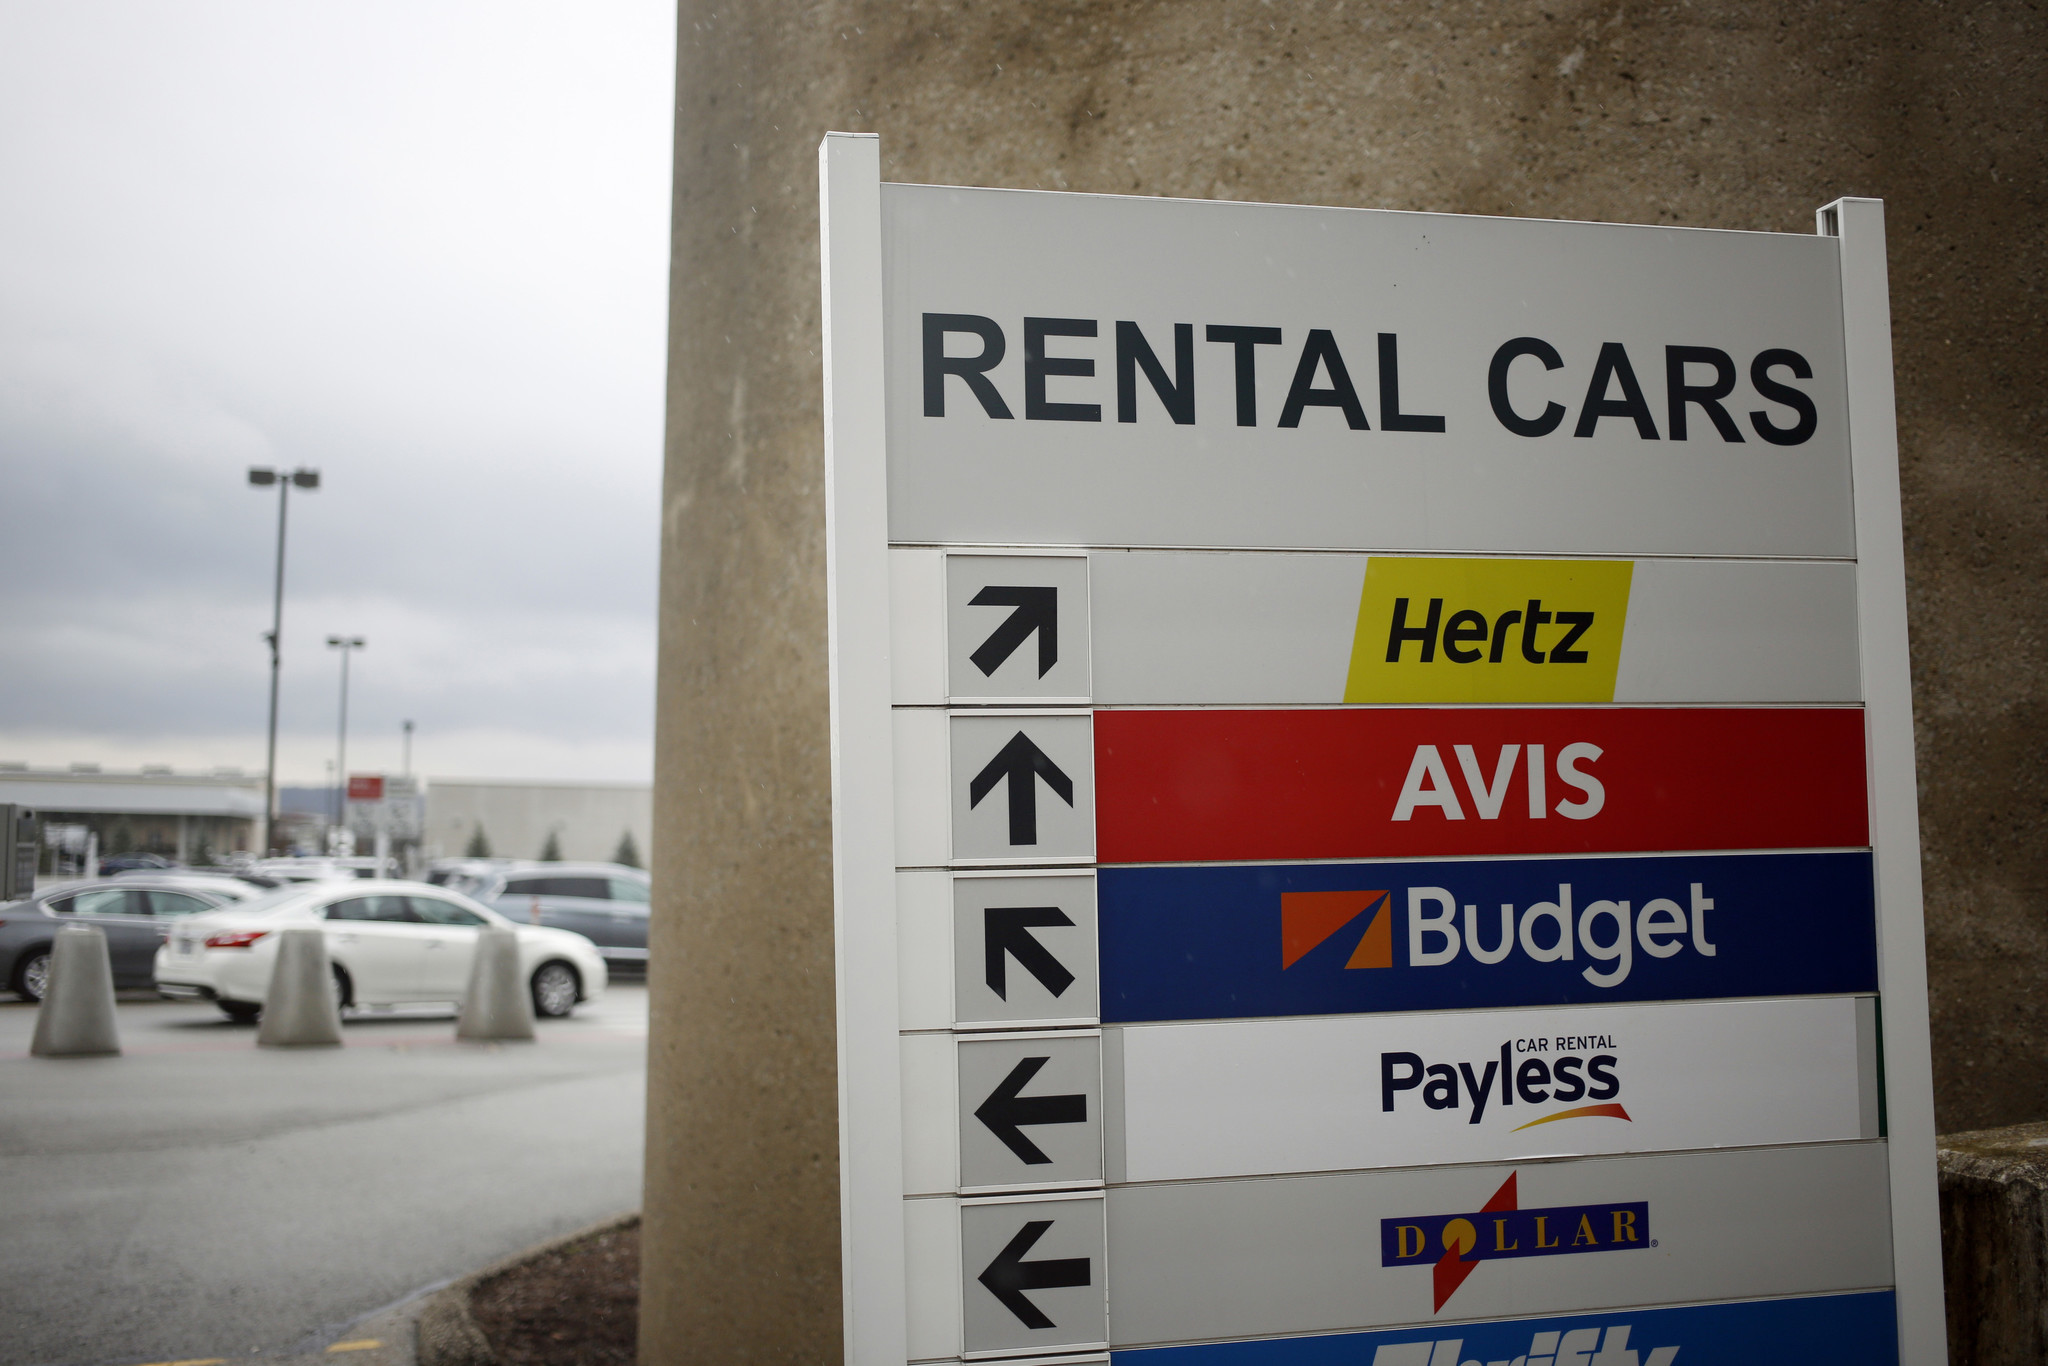  Car  rental  companies  find a way to ding motorists for 